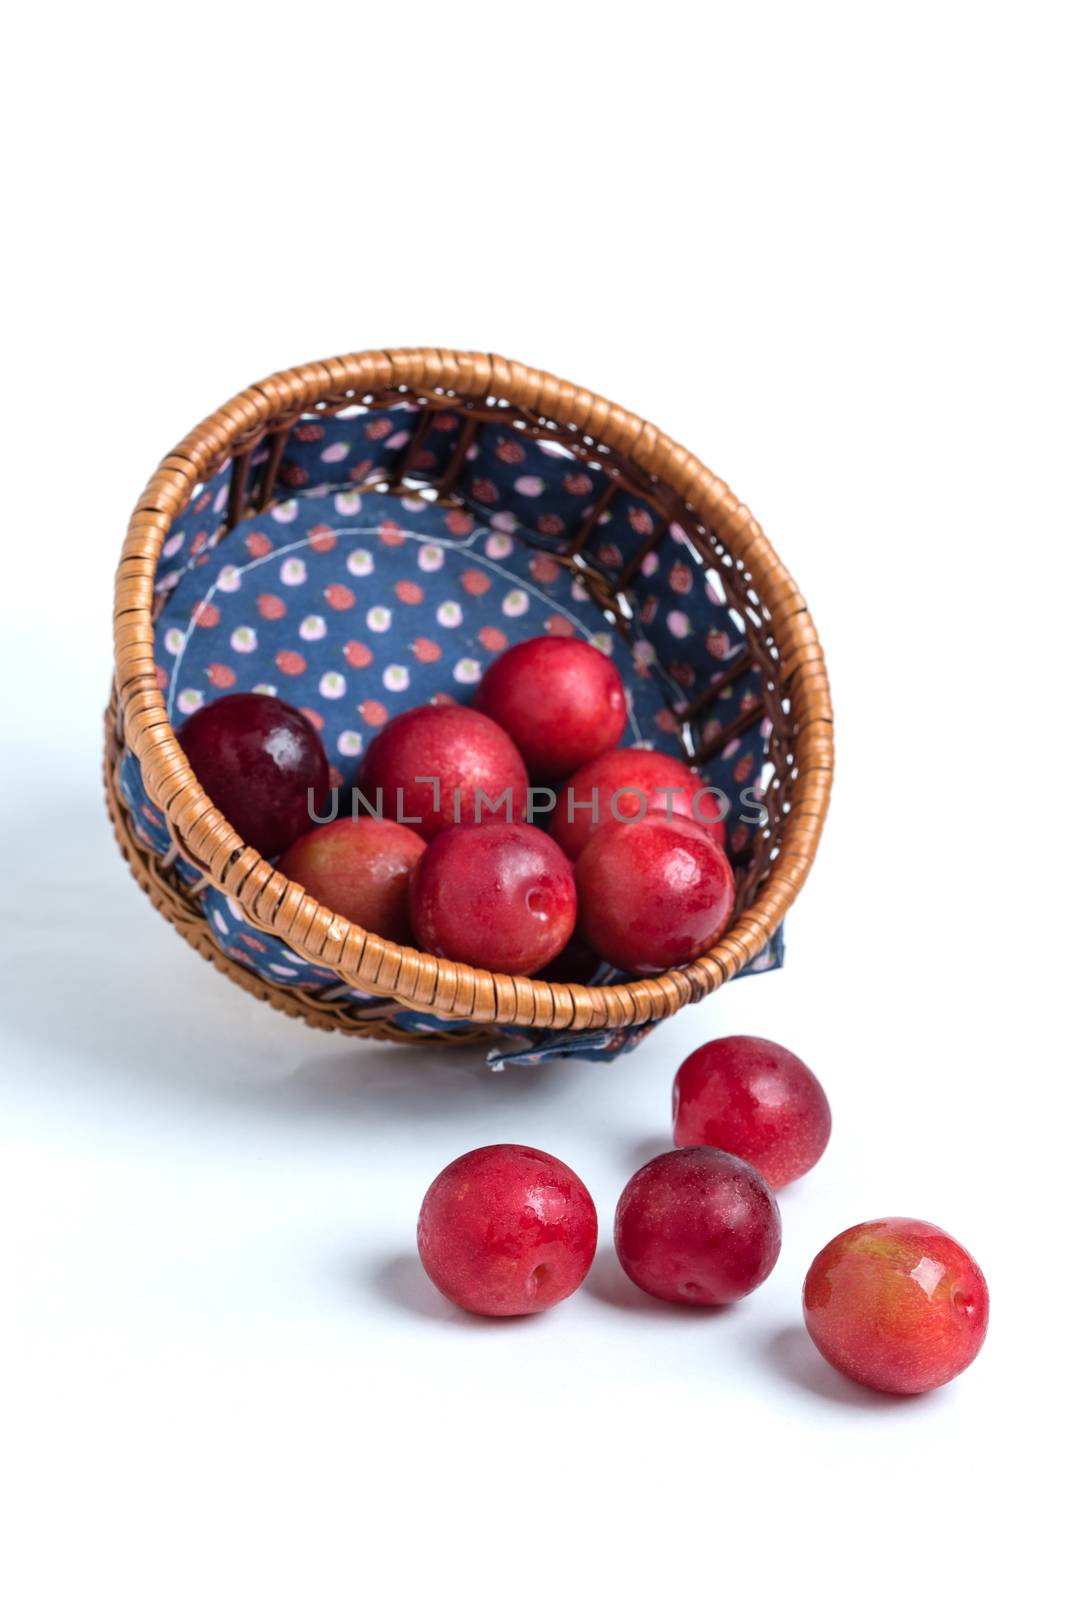 Red plums pouring out of a wicker basket with a blue cloth onto a white background.